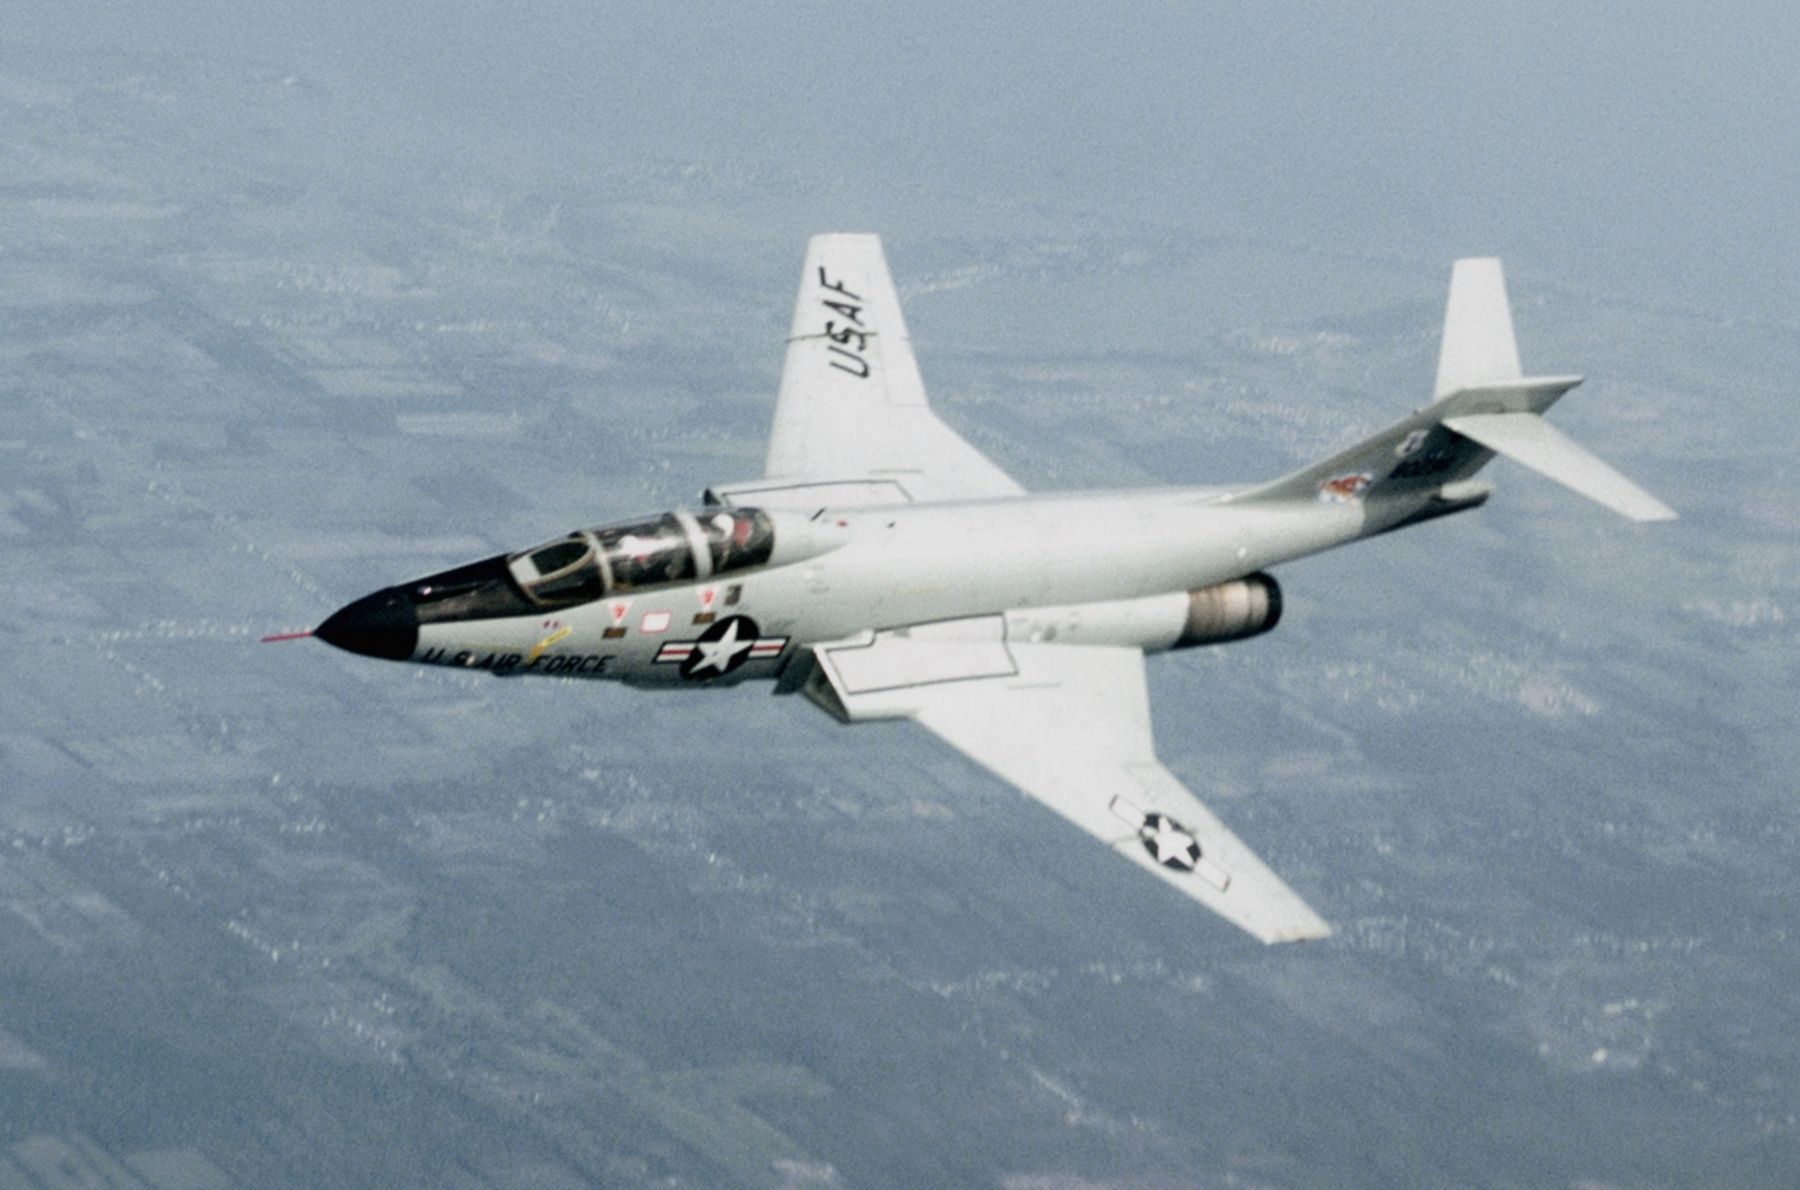 A U.S. Air National Guard McDonnell F-101B Voodoo aircraft banking in flight in 1978. image. Click for full size.